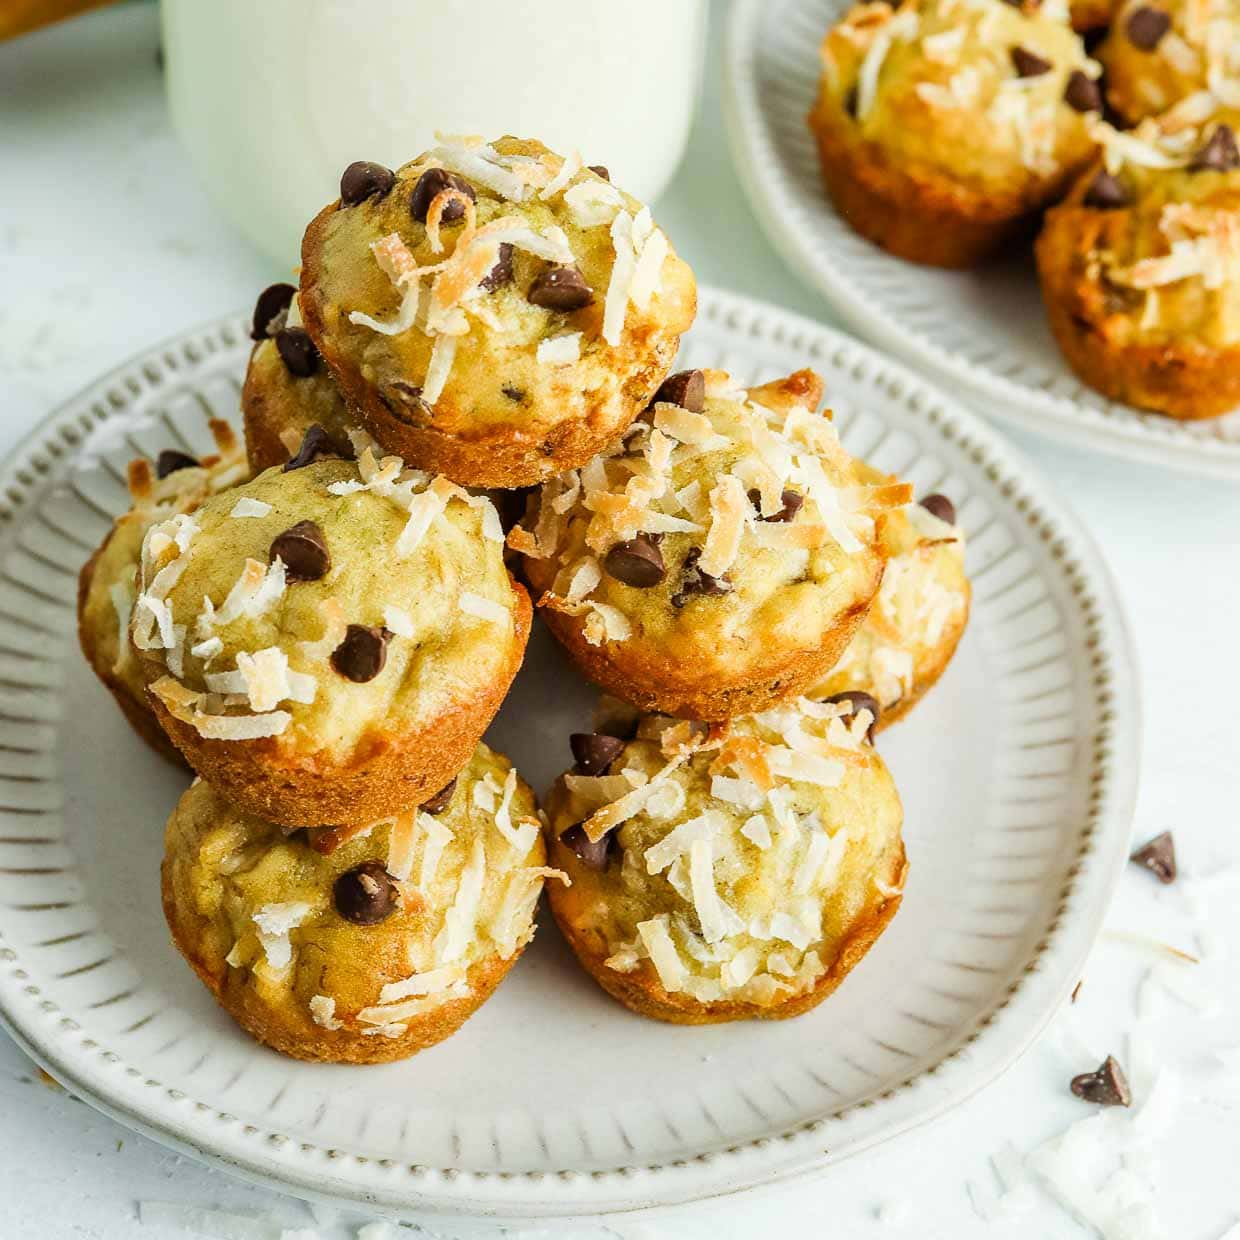 Stack of banana coconut muffins on a white plate with chocolate chips scattered around.